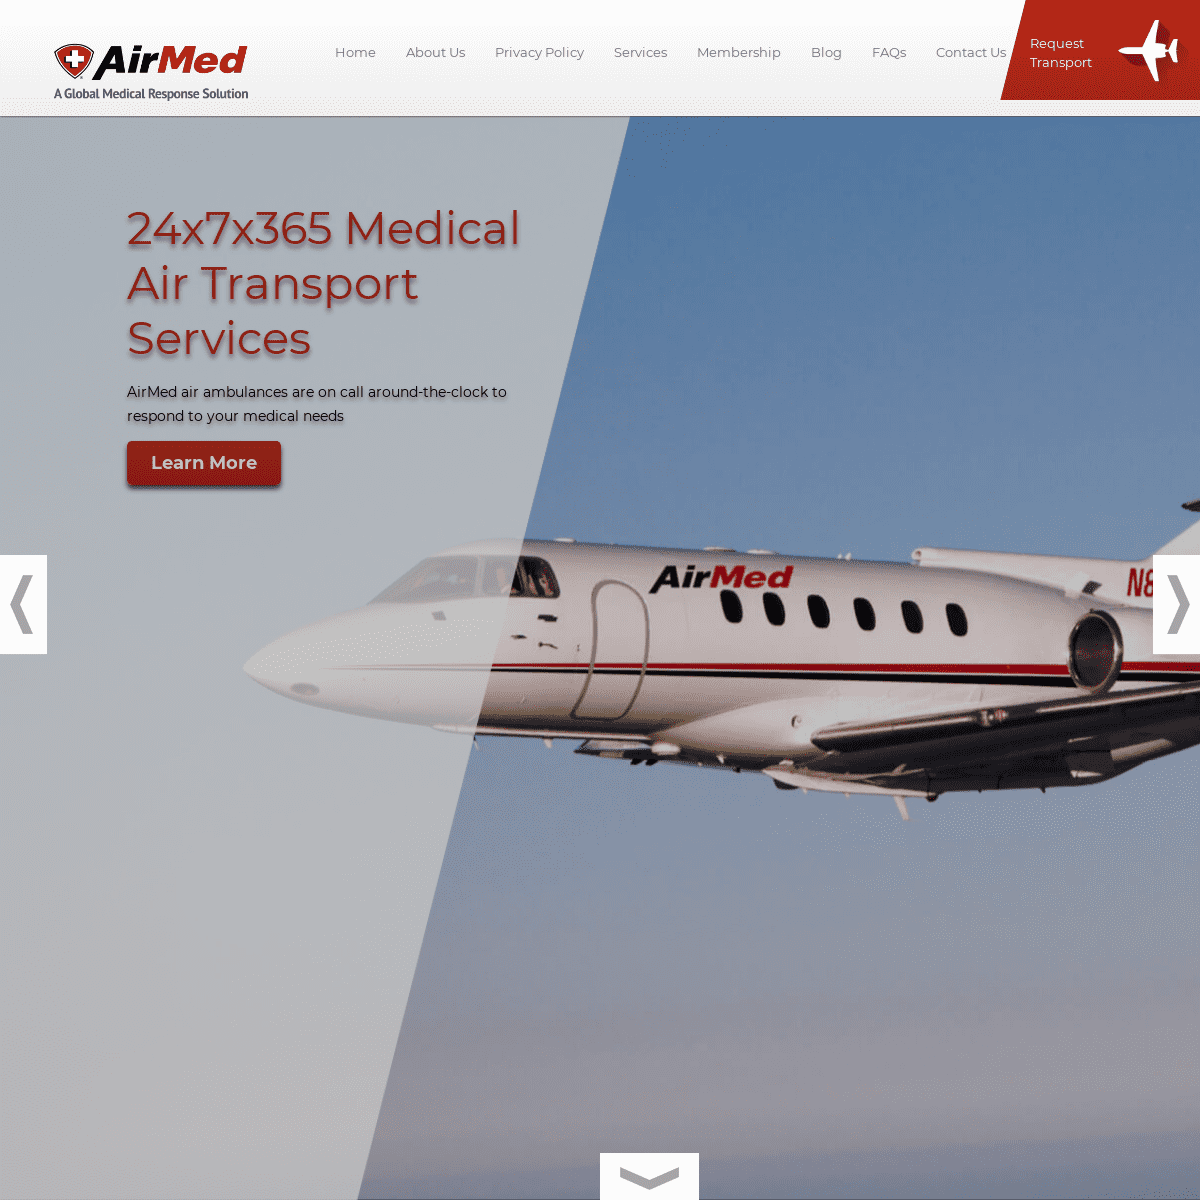 A complete backup of https://airmed.com